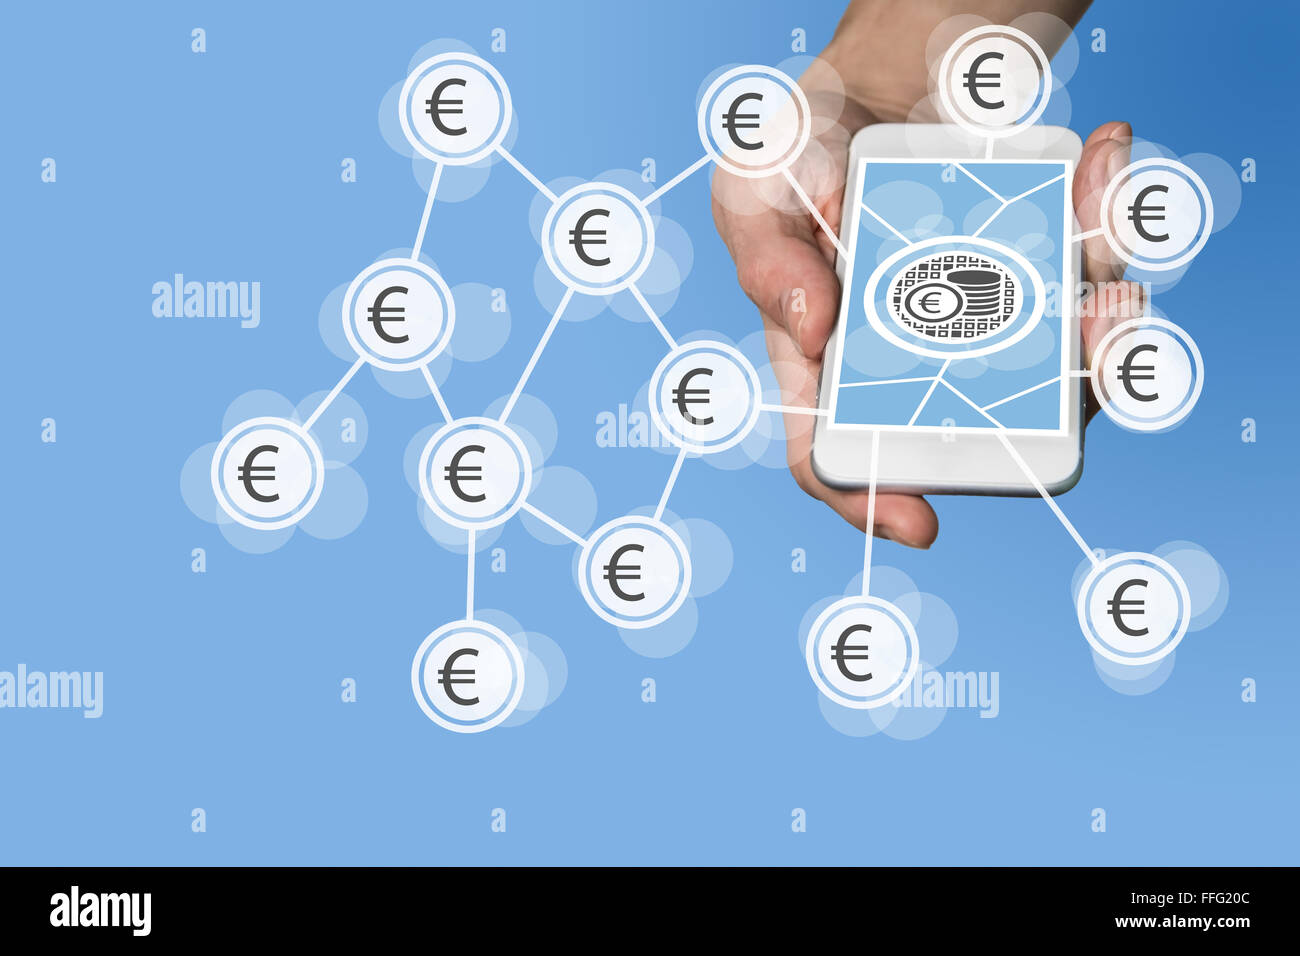 Mobile e-payment and e-commerce concept with hand holding modern smartphone in front of neutral blue background Stock Photo